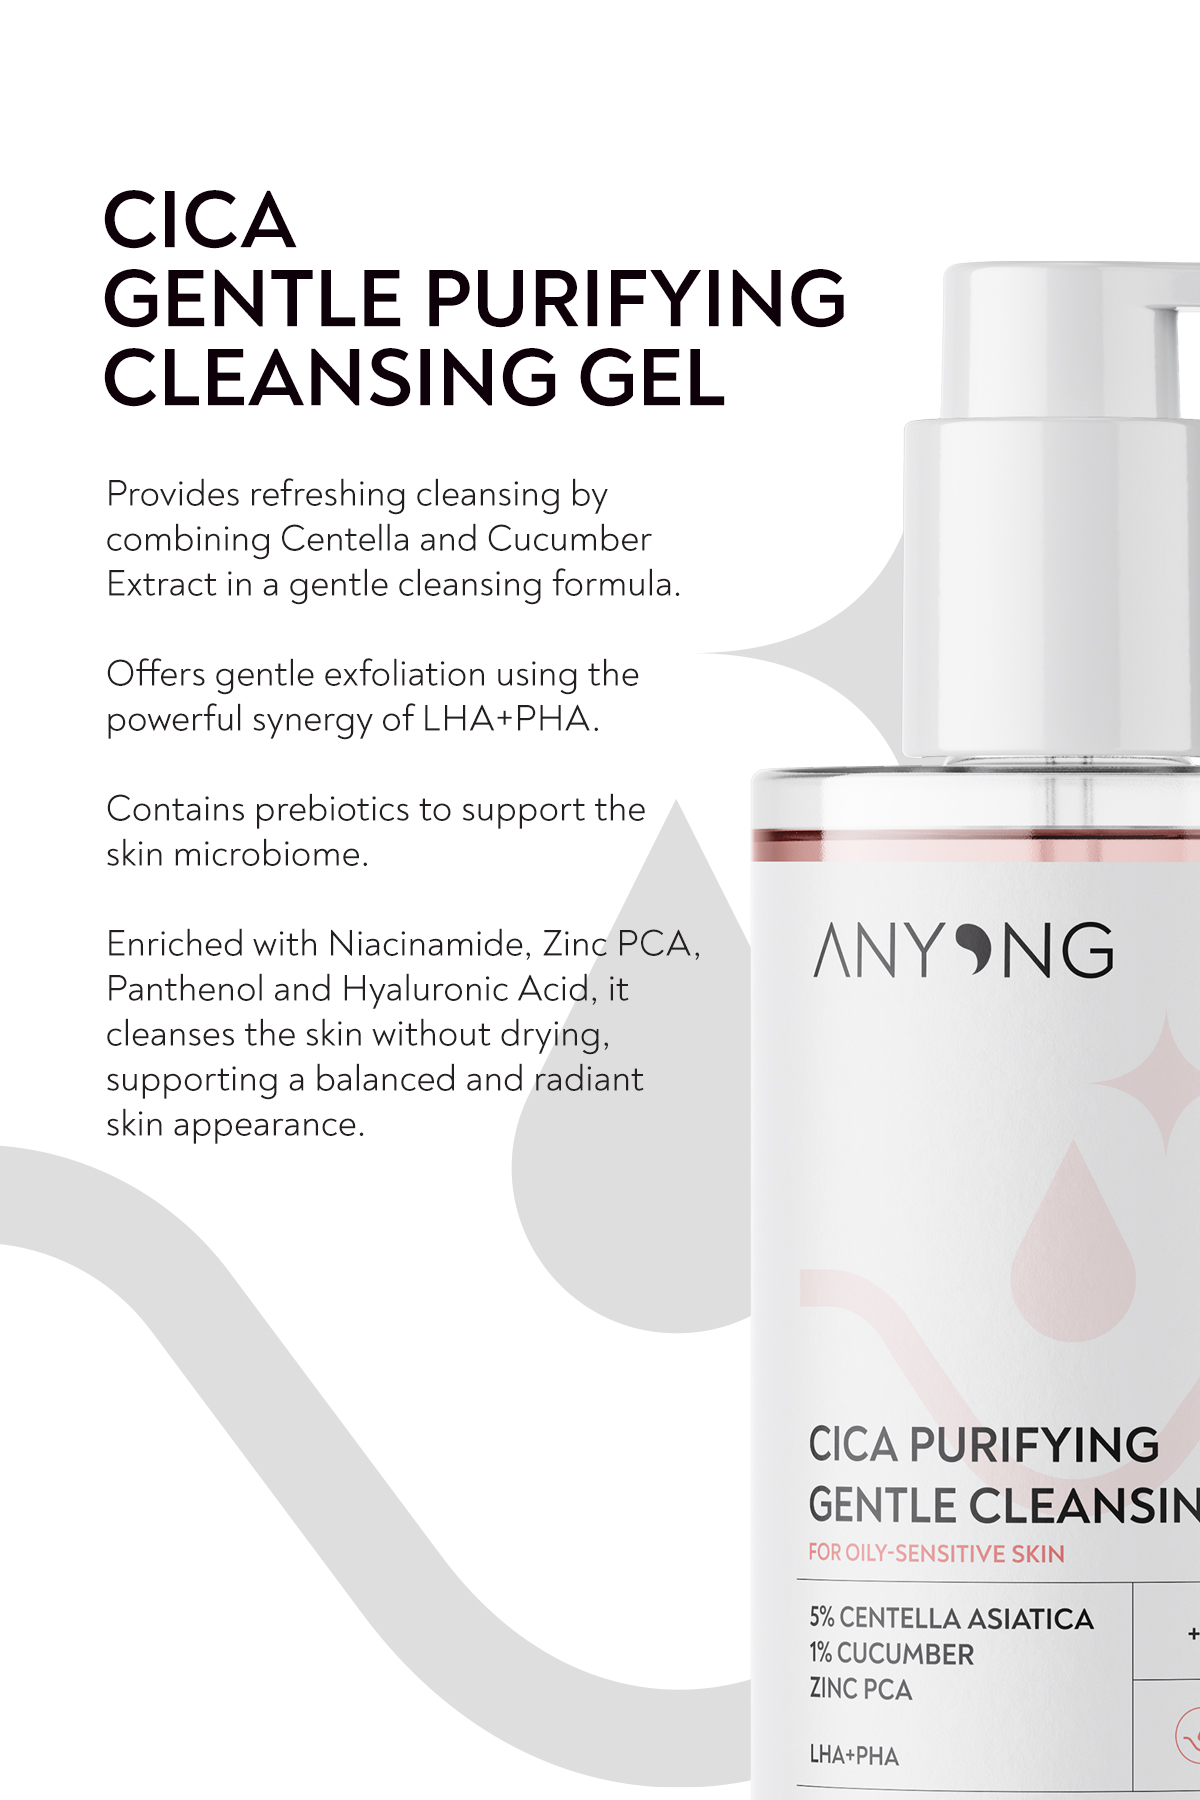 Cica Purifying Gentle Cleansing Gel